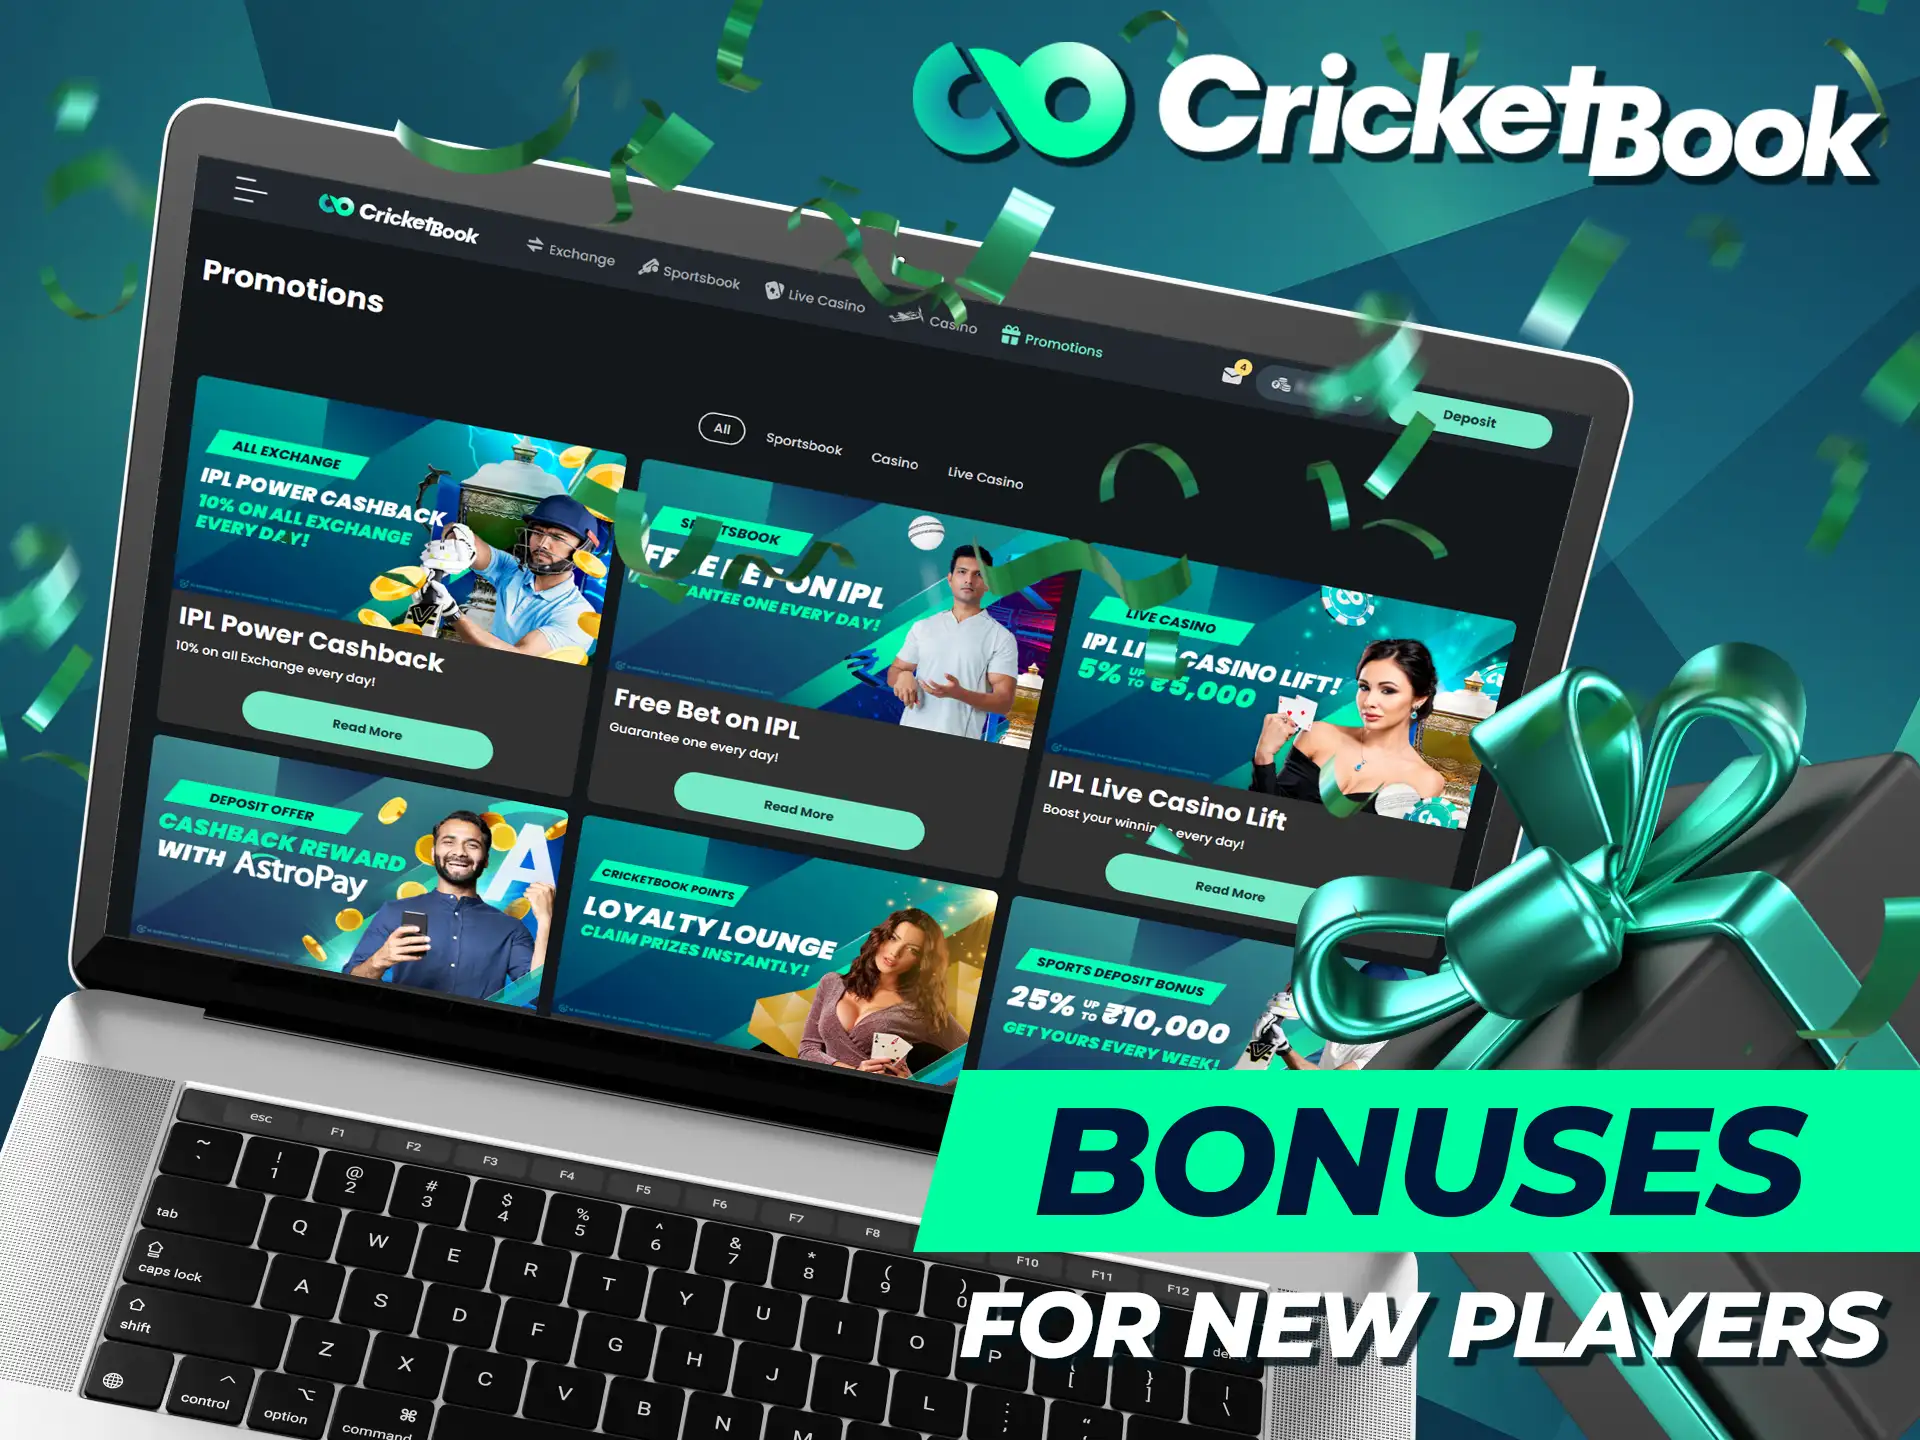 CricketBook is offering an exclusive promotion for all new users.